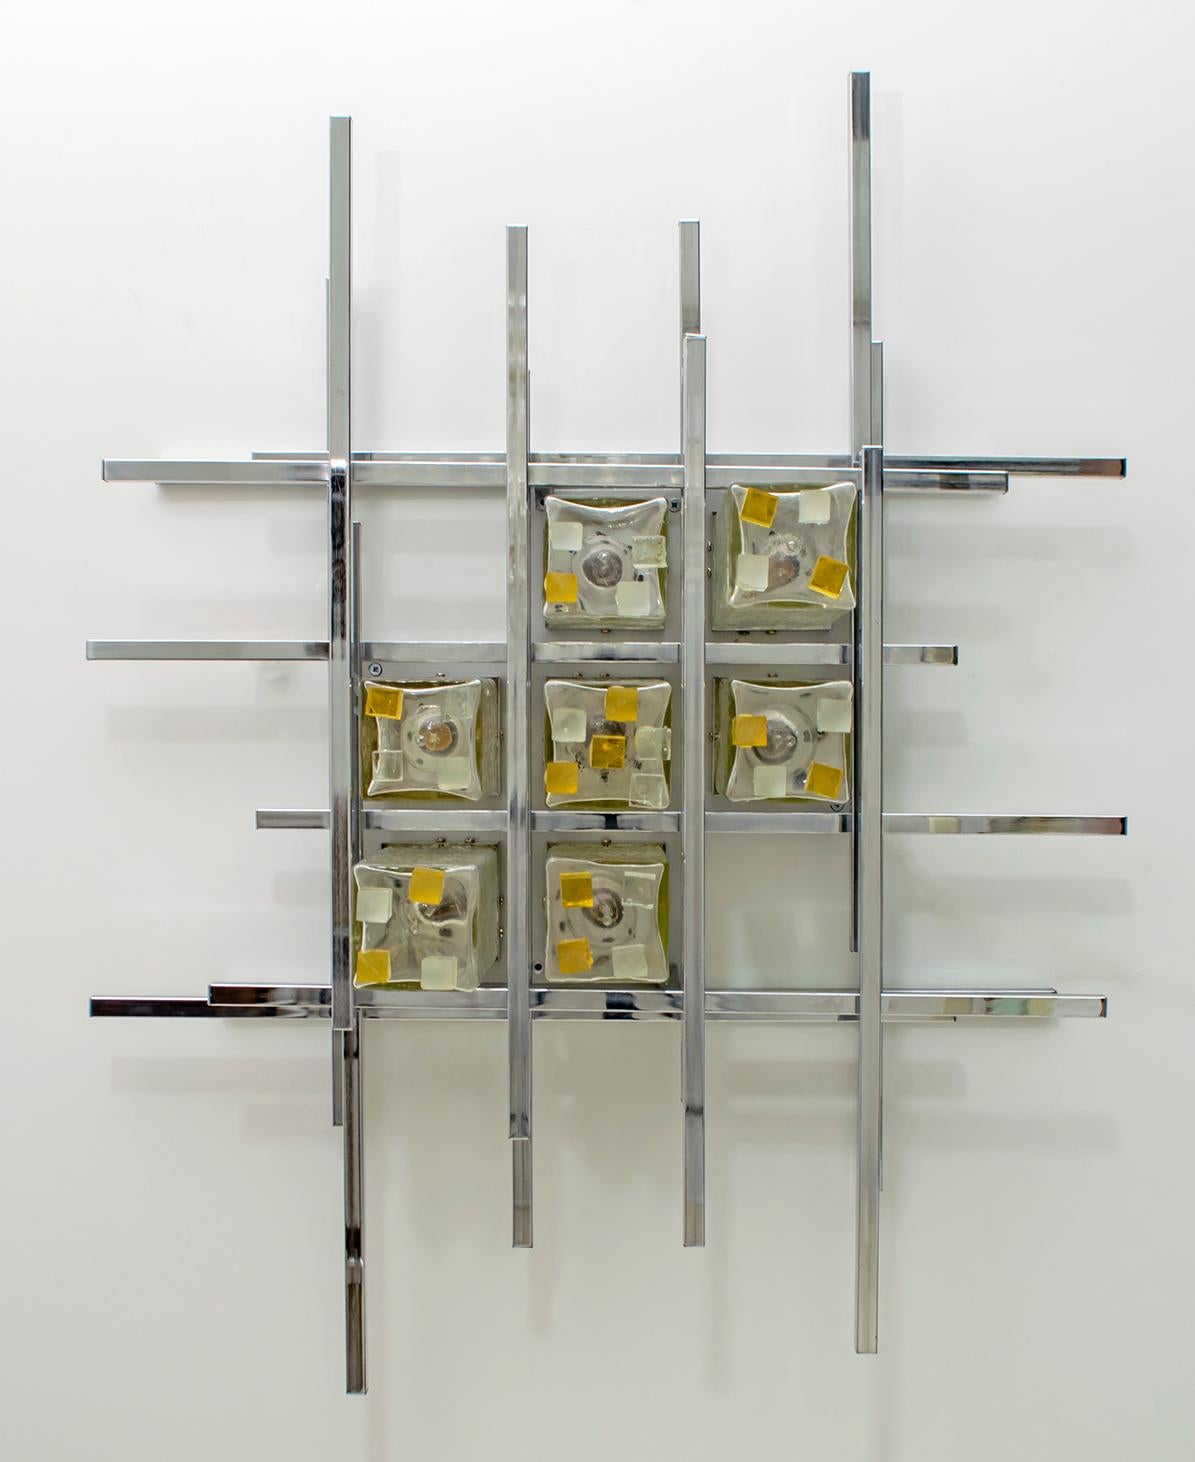 This wall lamp was created by the master glassmaker Albano Poli for his company Poliarte. Wall lamp with rectangular chromed metal rods and clear Murano glass cubes mounted on aluminum plates, to create a unique sculpture, circa 1970s.

Poliarte: